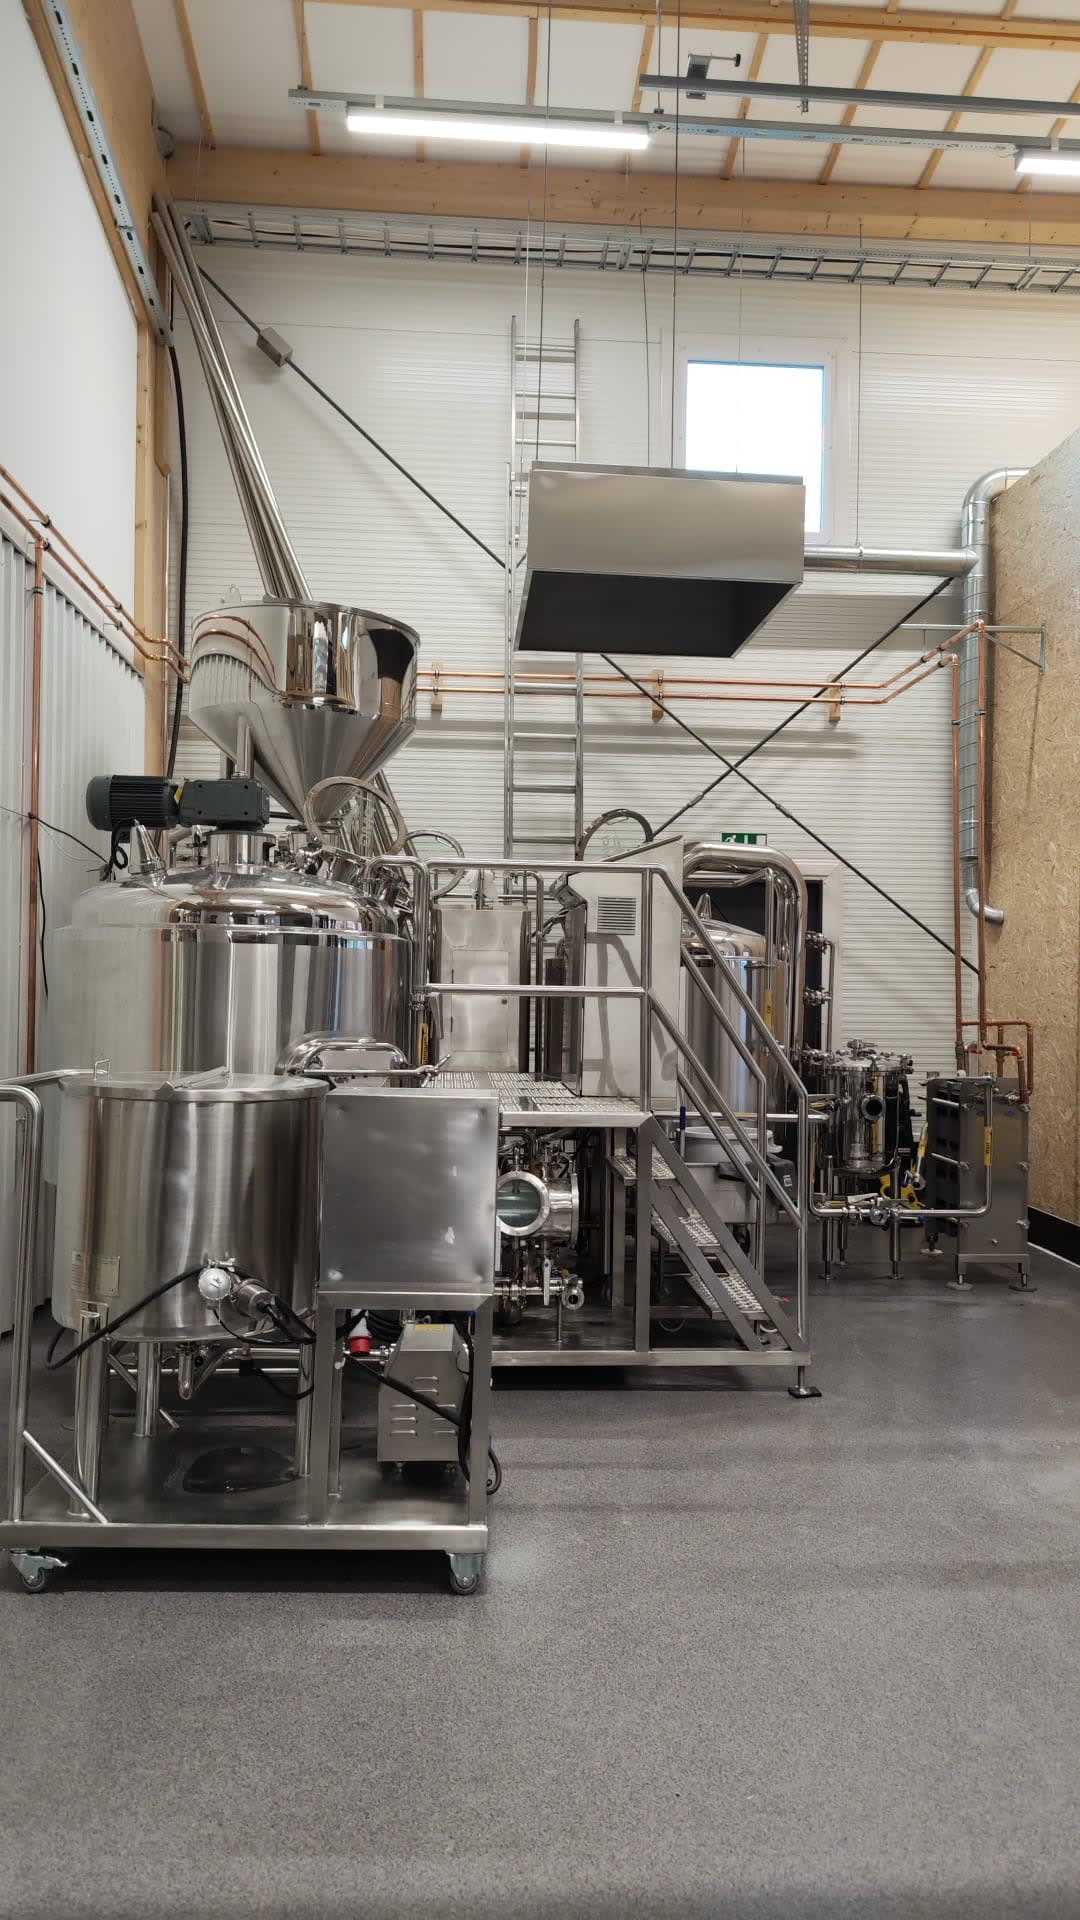 Equipment of the brewery